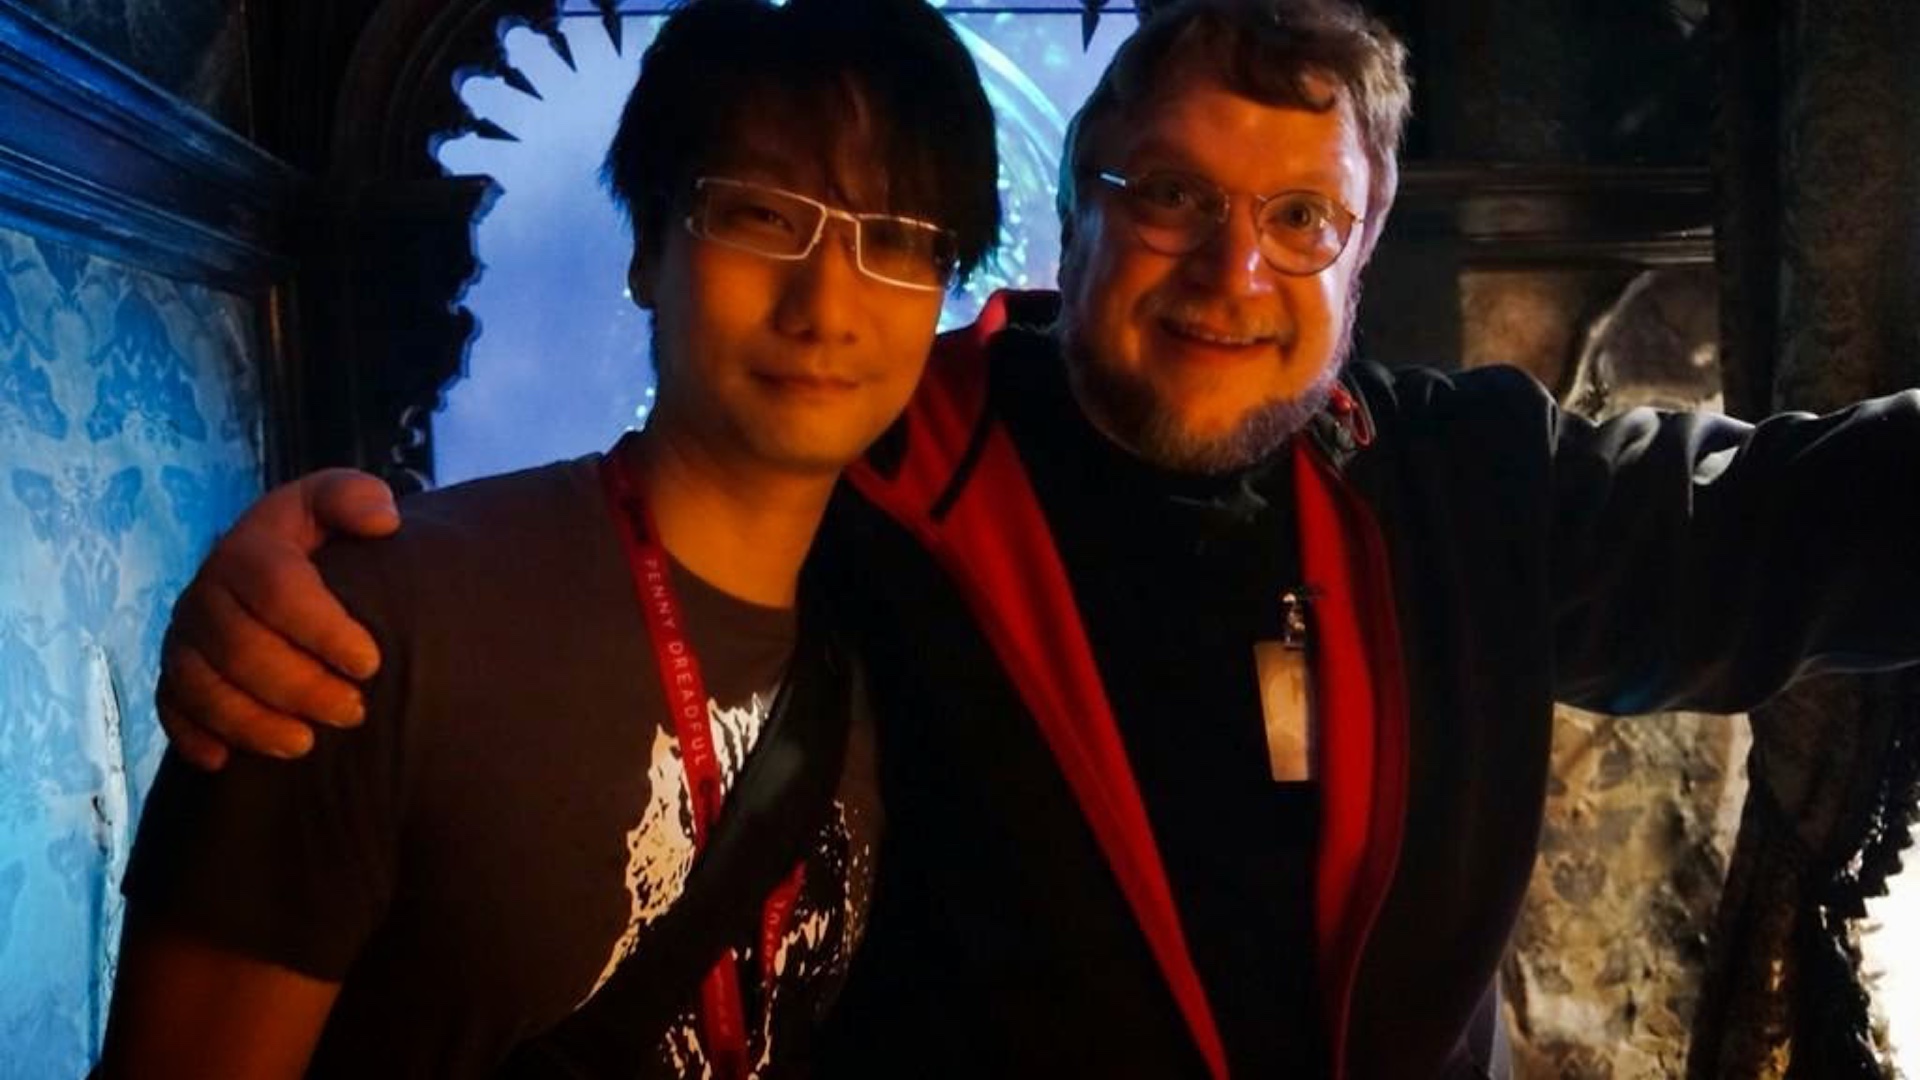 Guillermo Del Toro And Hideo Kojima To Collaborate After Silent Hills